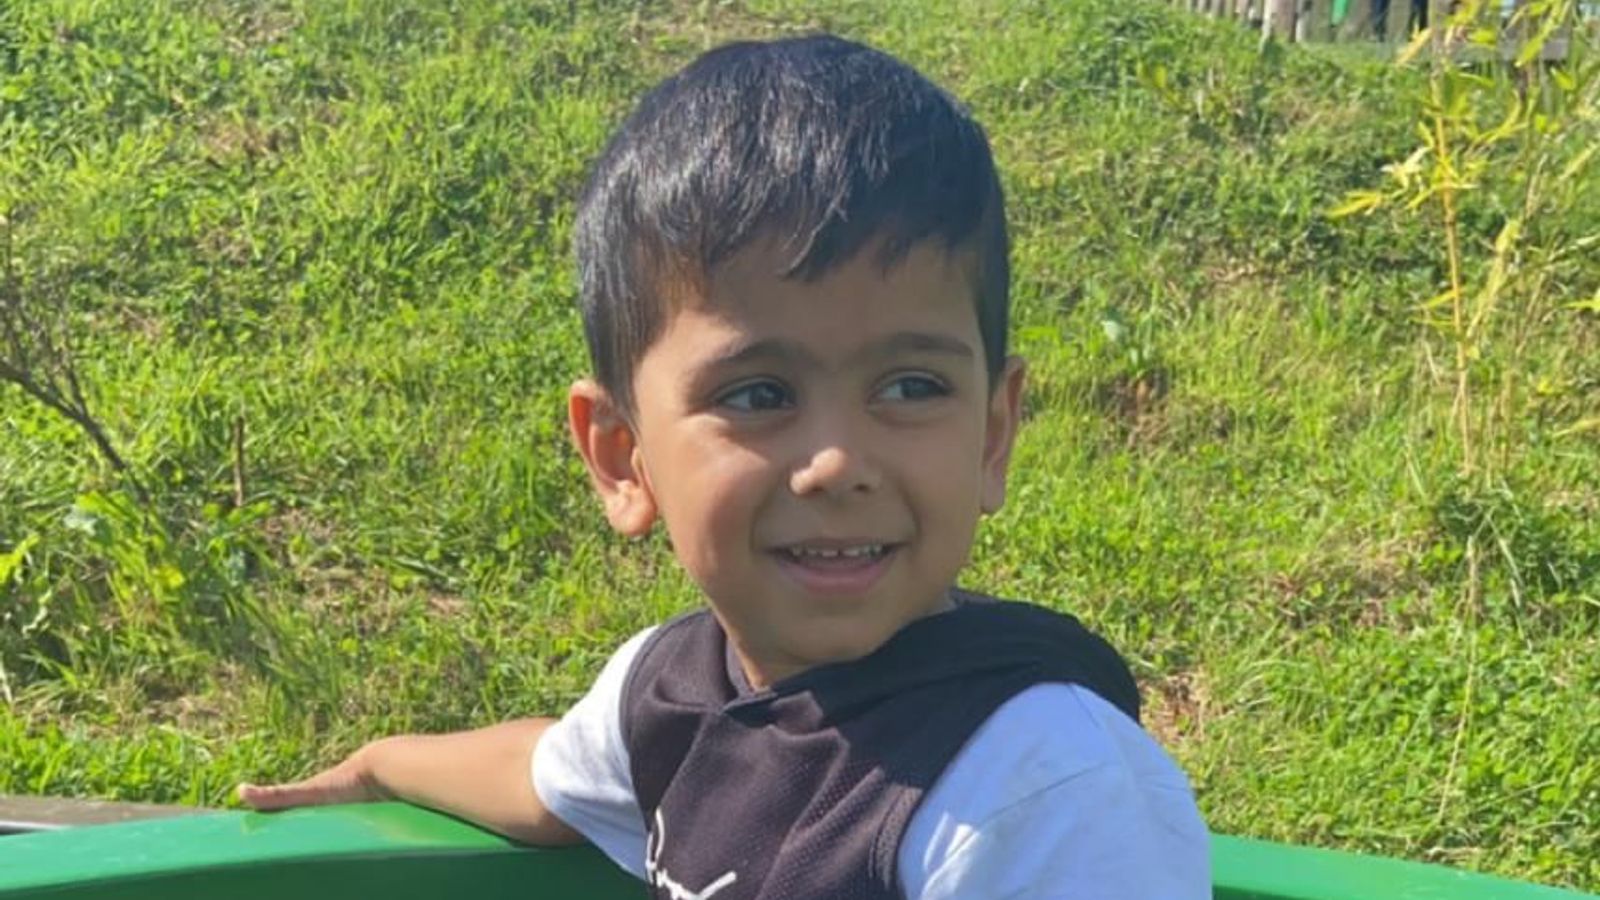 Yusuf Nazir: Boy, 5, who died after being sent home from hospital was 'inhumanely treated' and 'gasping for breath', say witnesses